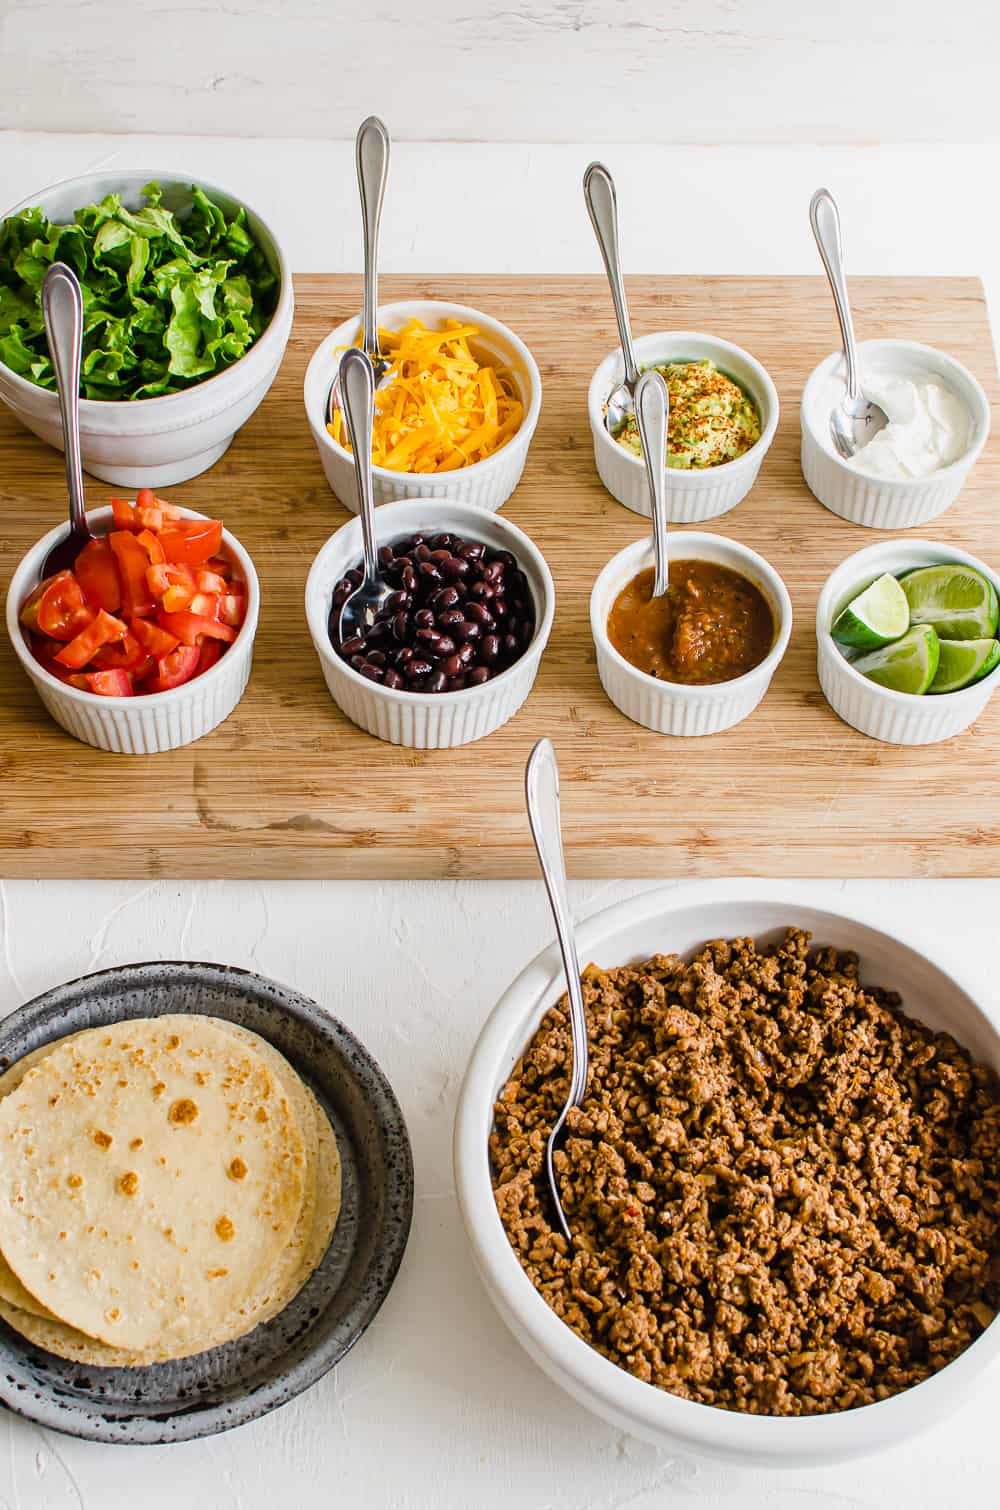 Taco bar with all the toppings lined up.